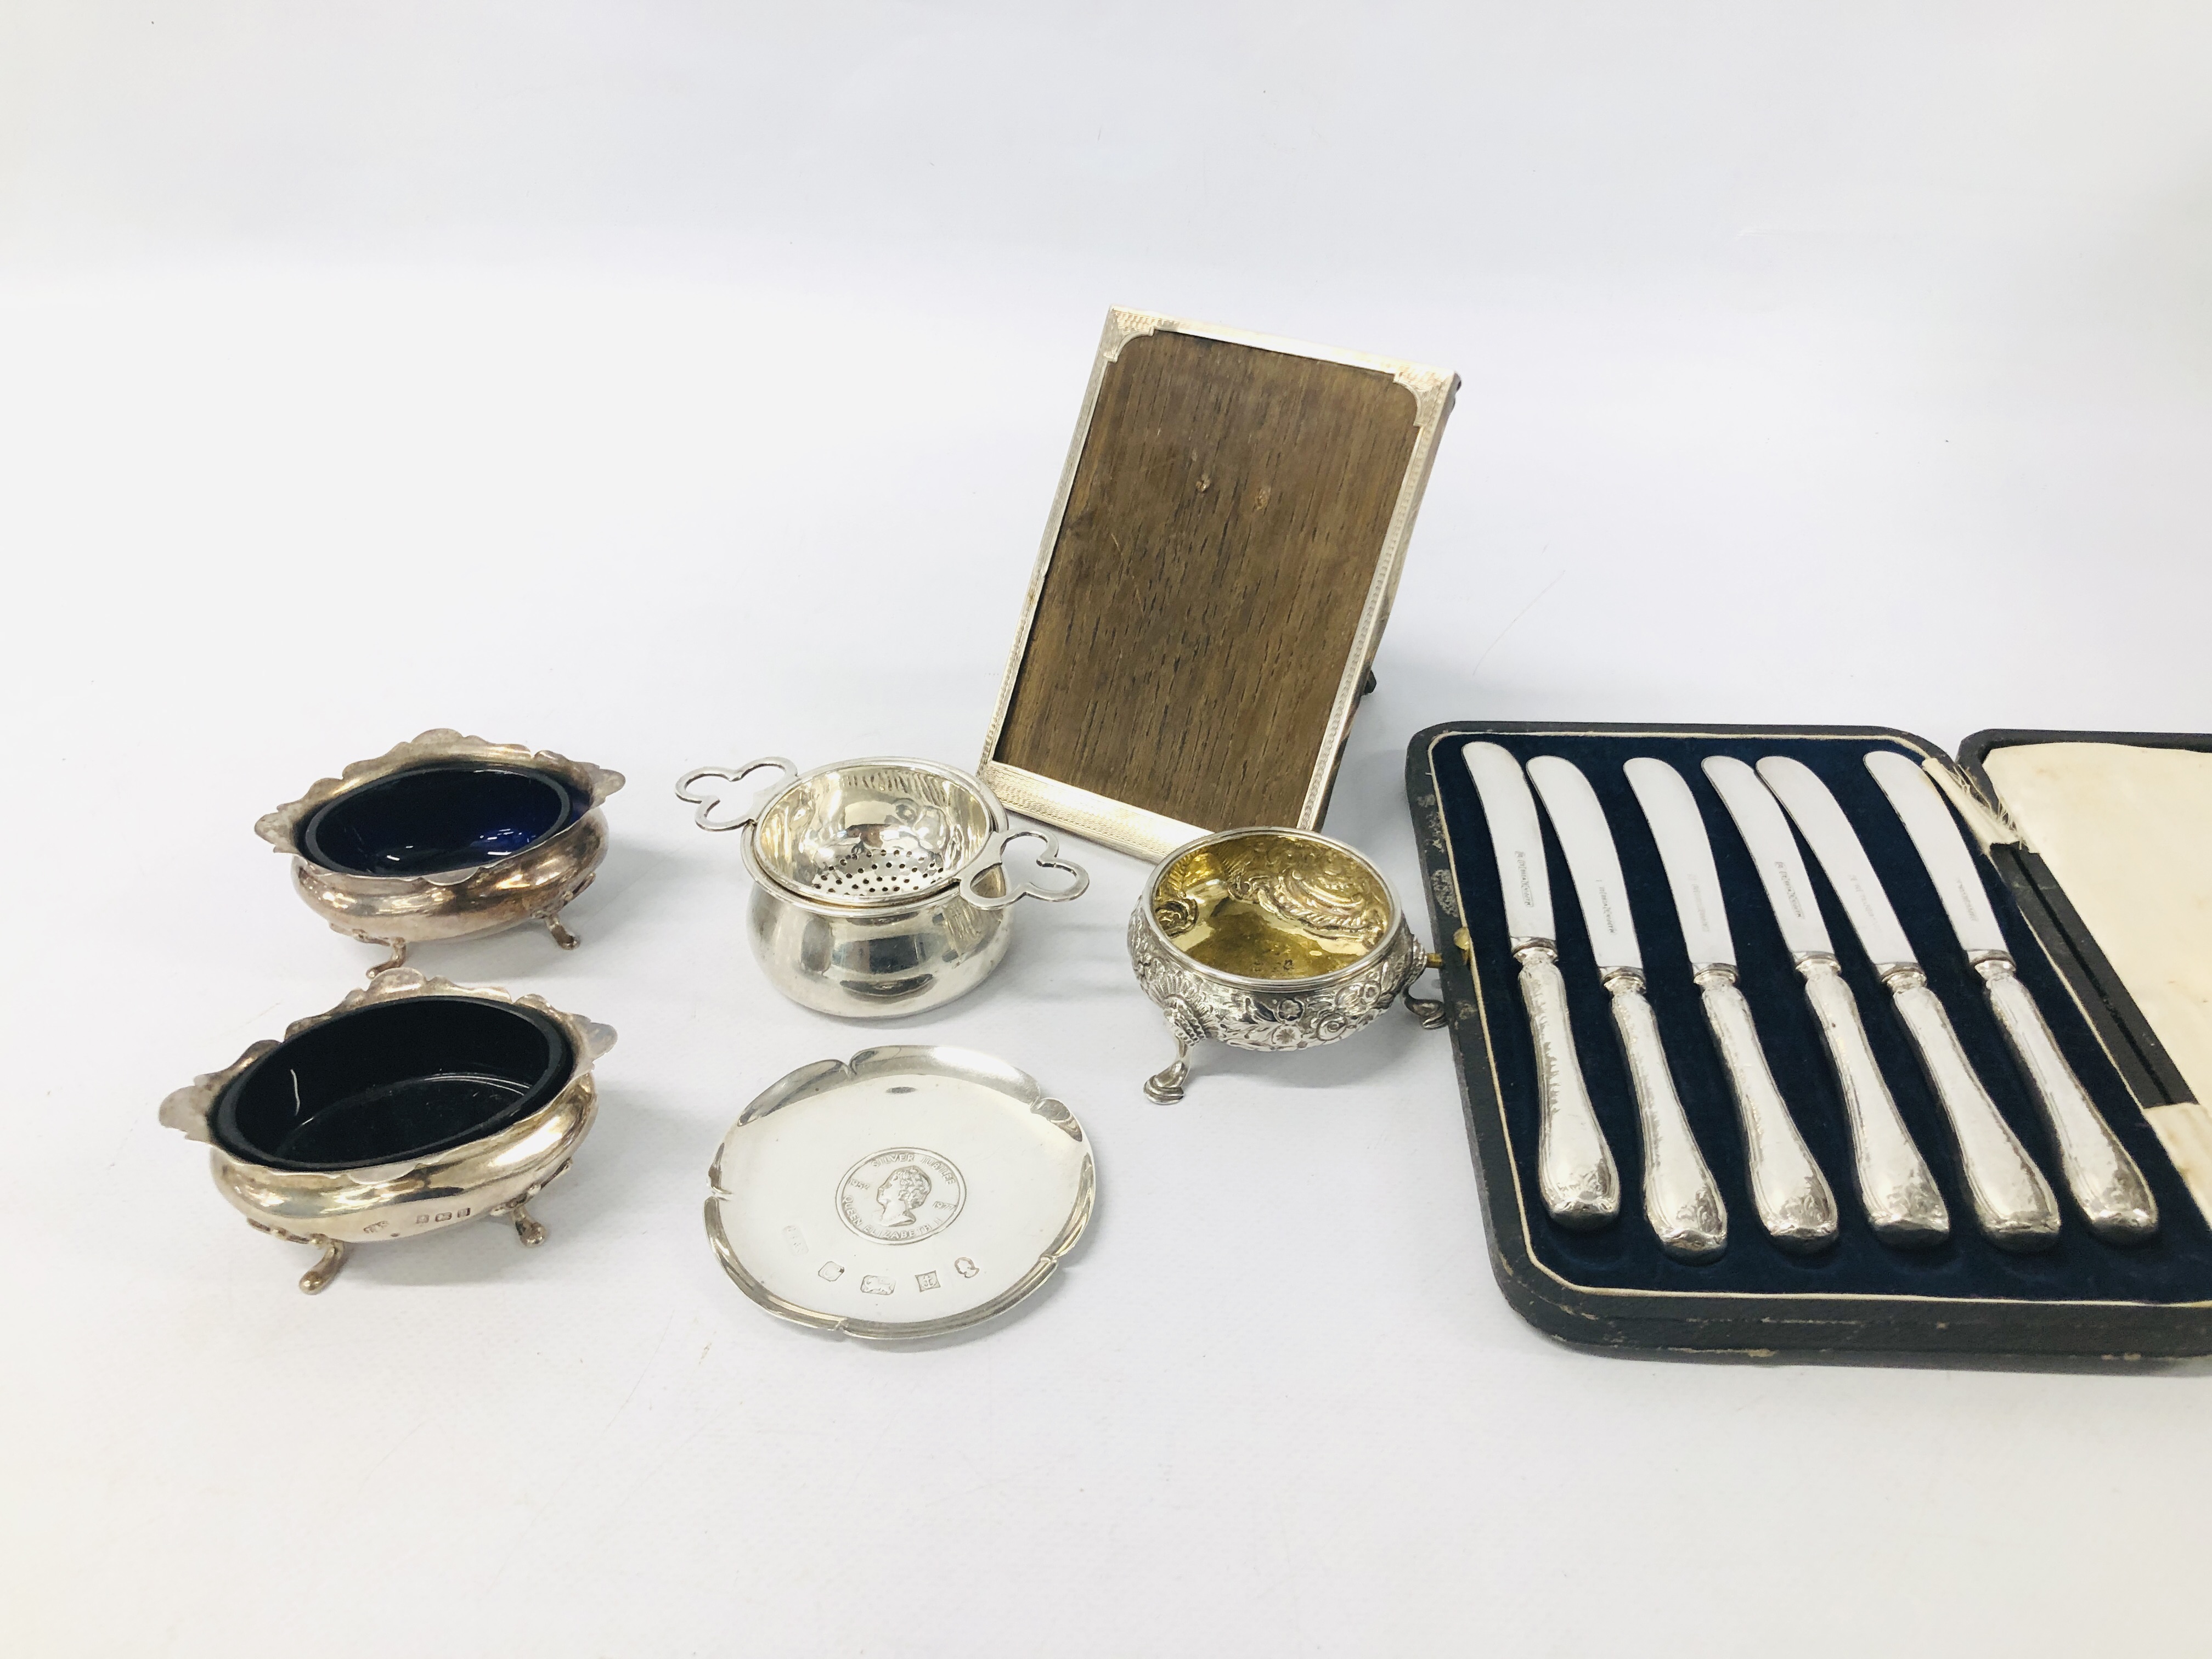 COLLECTION OF SILVER TO INCLUDE PAIR OF SALTS, TEA STRAINER, GEORGIAN SALT, PHOTO FRAME,